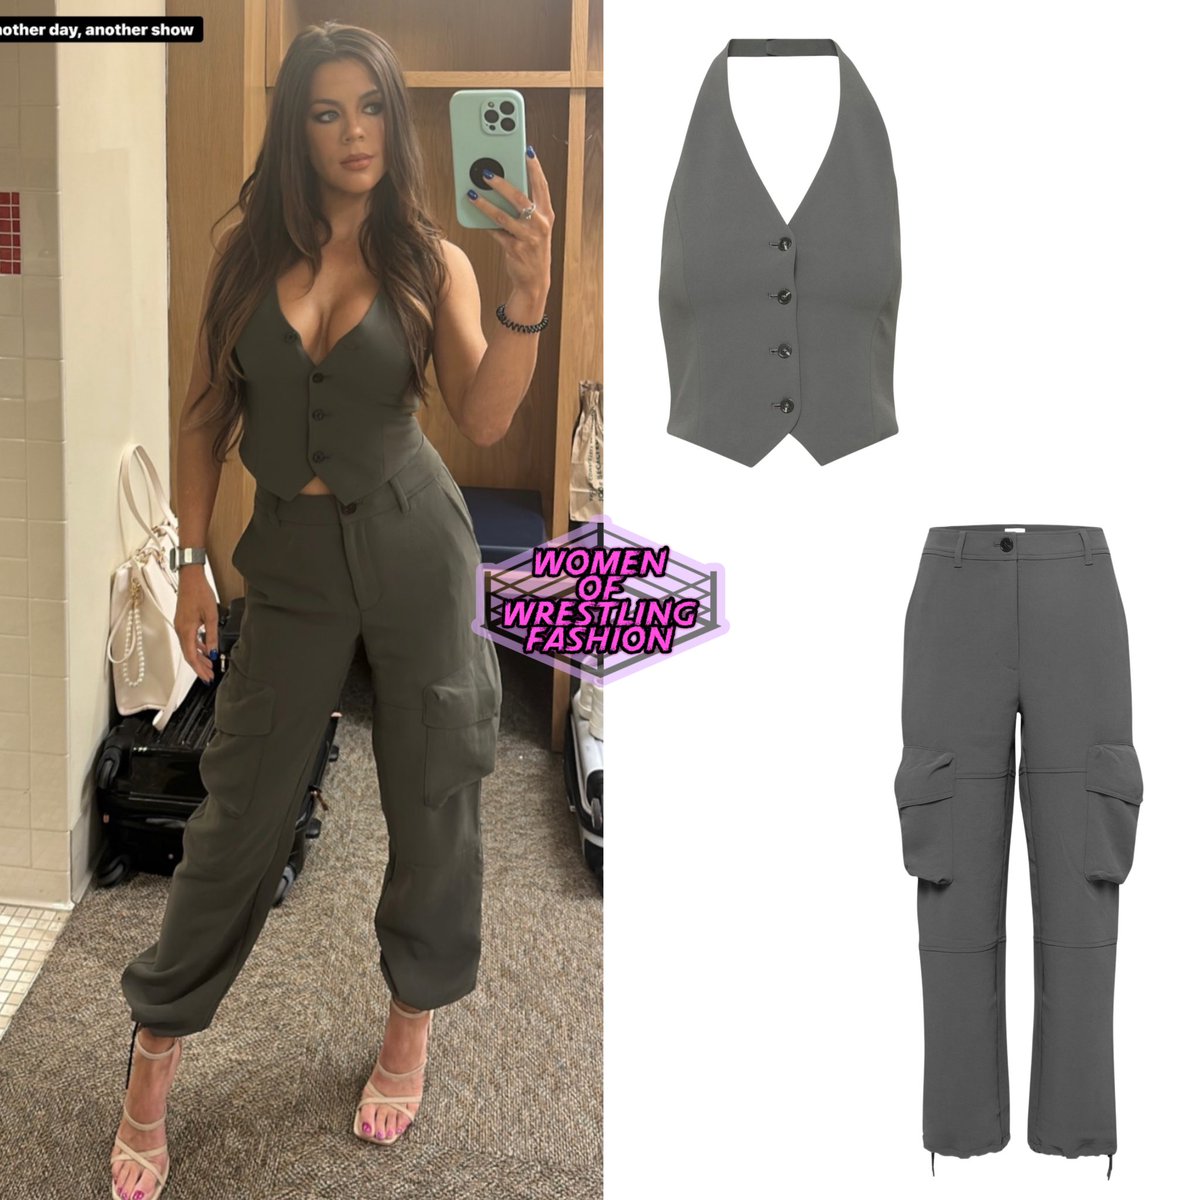 For #WWERaw, Jackie wore the Wilfred Vito Vest ($118) & Wilfred New Project Cargo Pant (n/a) in Cool Grey from Aritzia